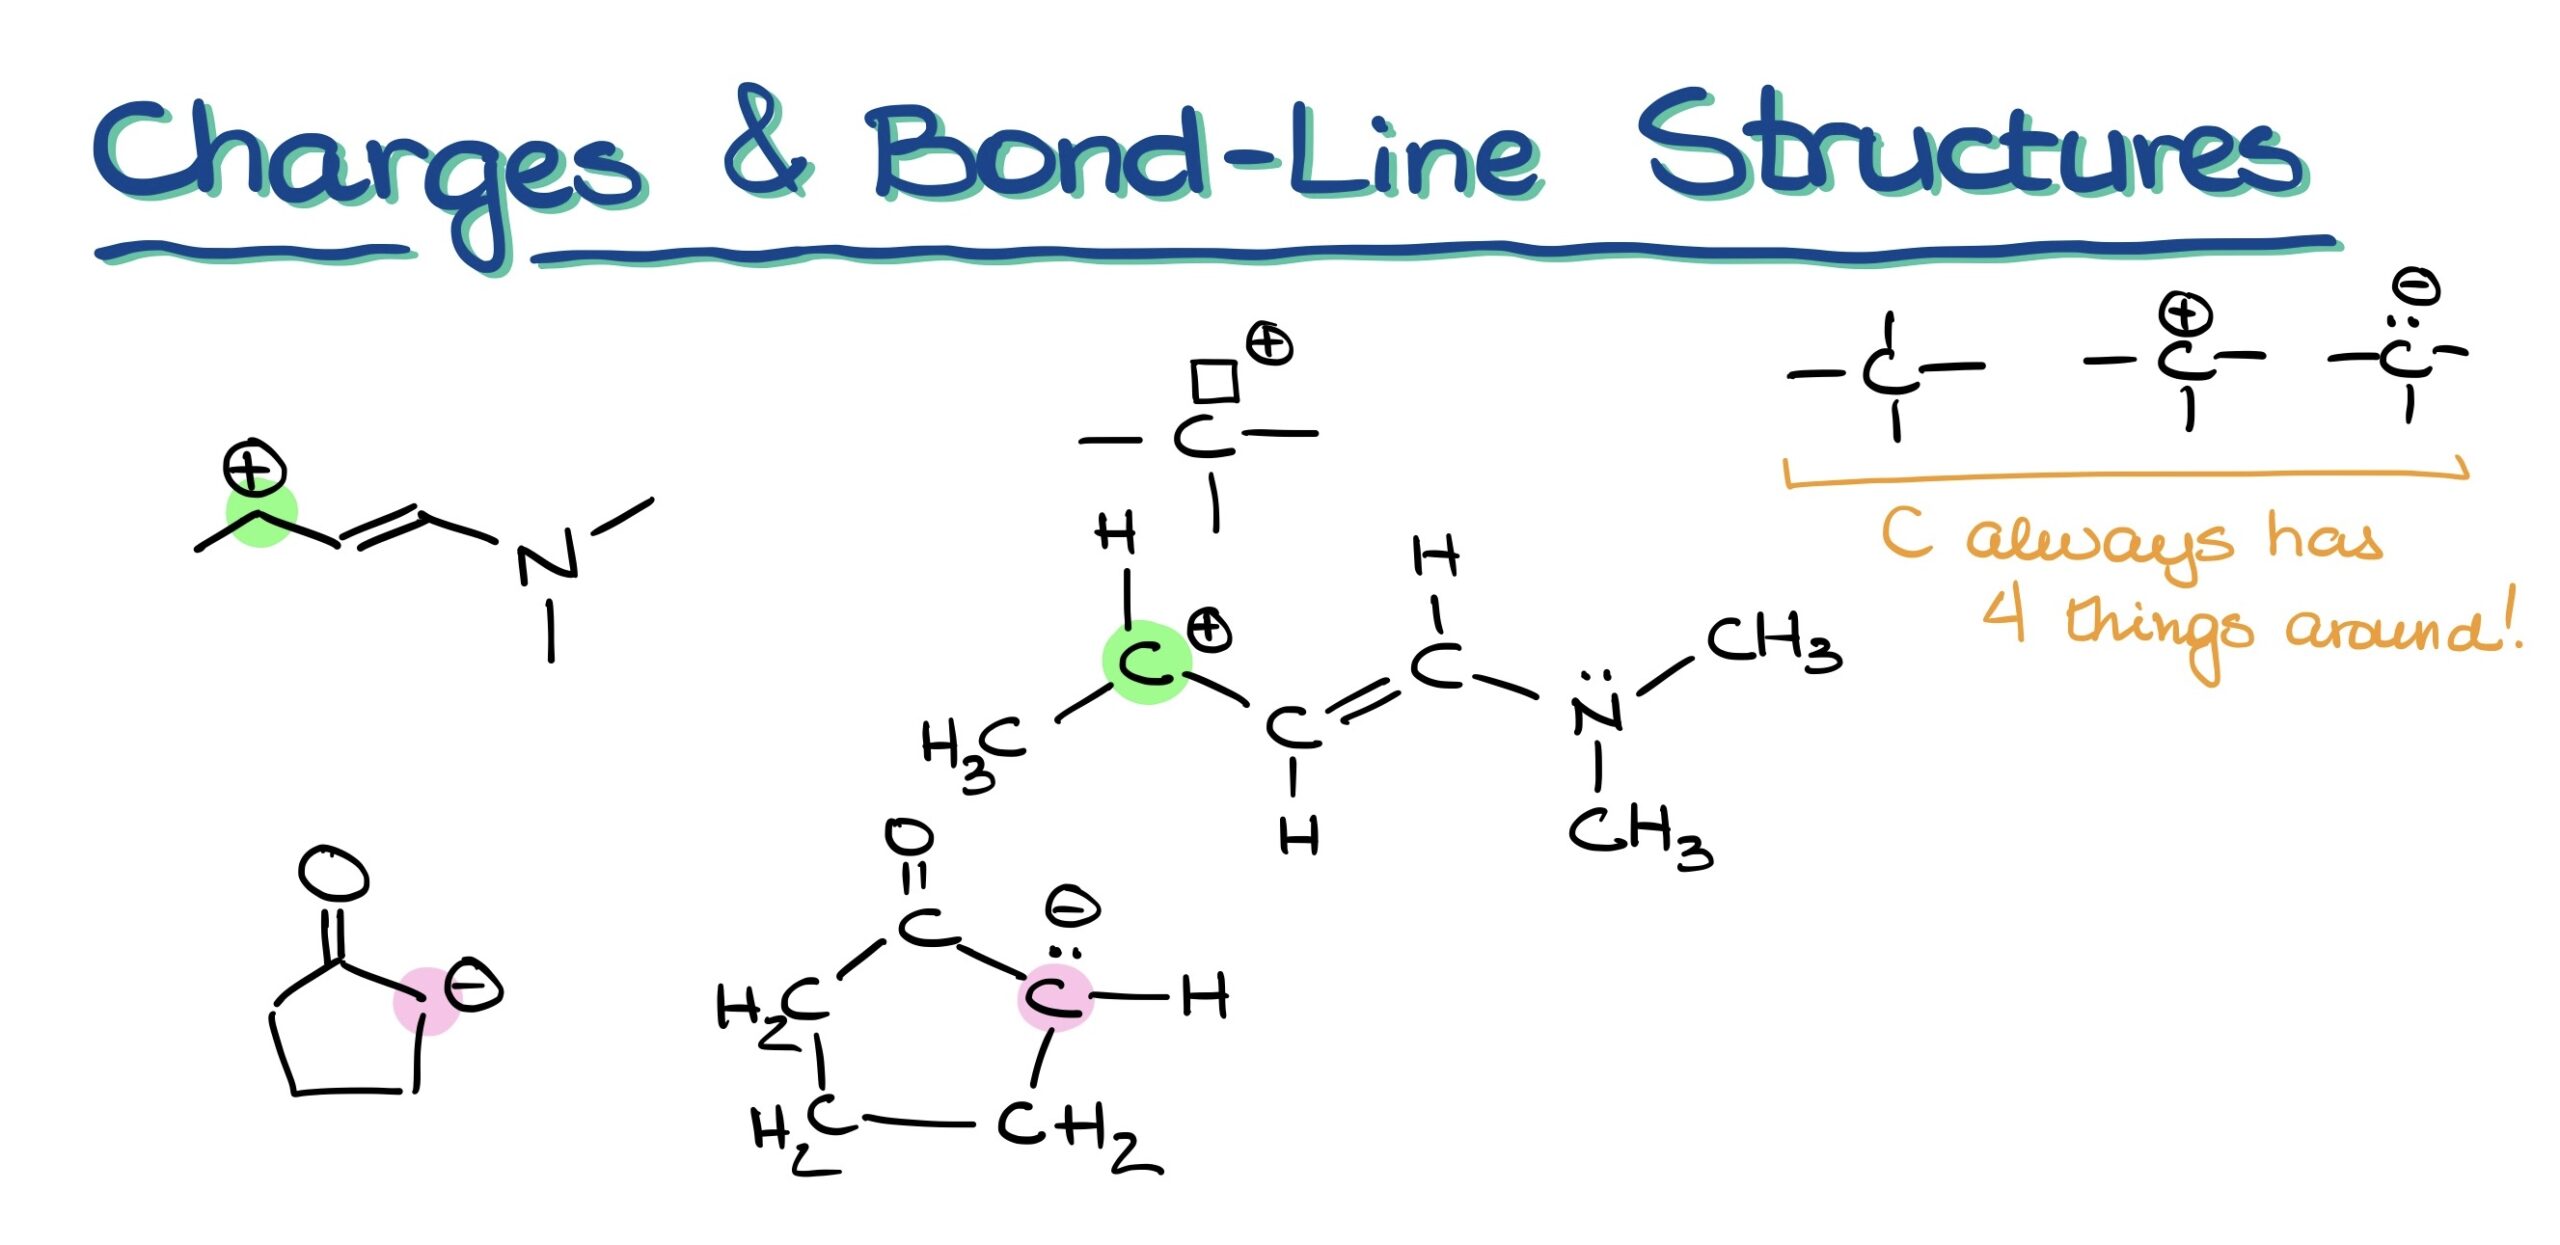 formal charges on bond-line structures